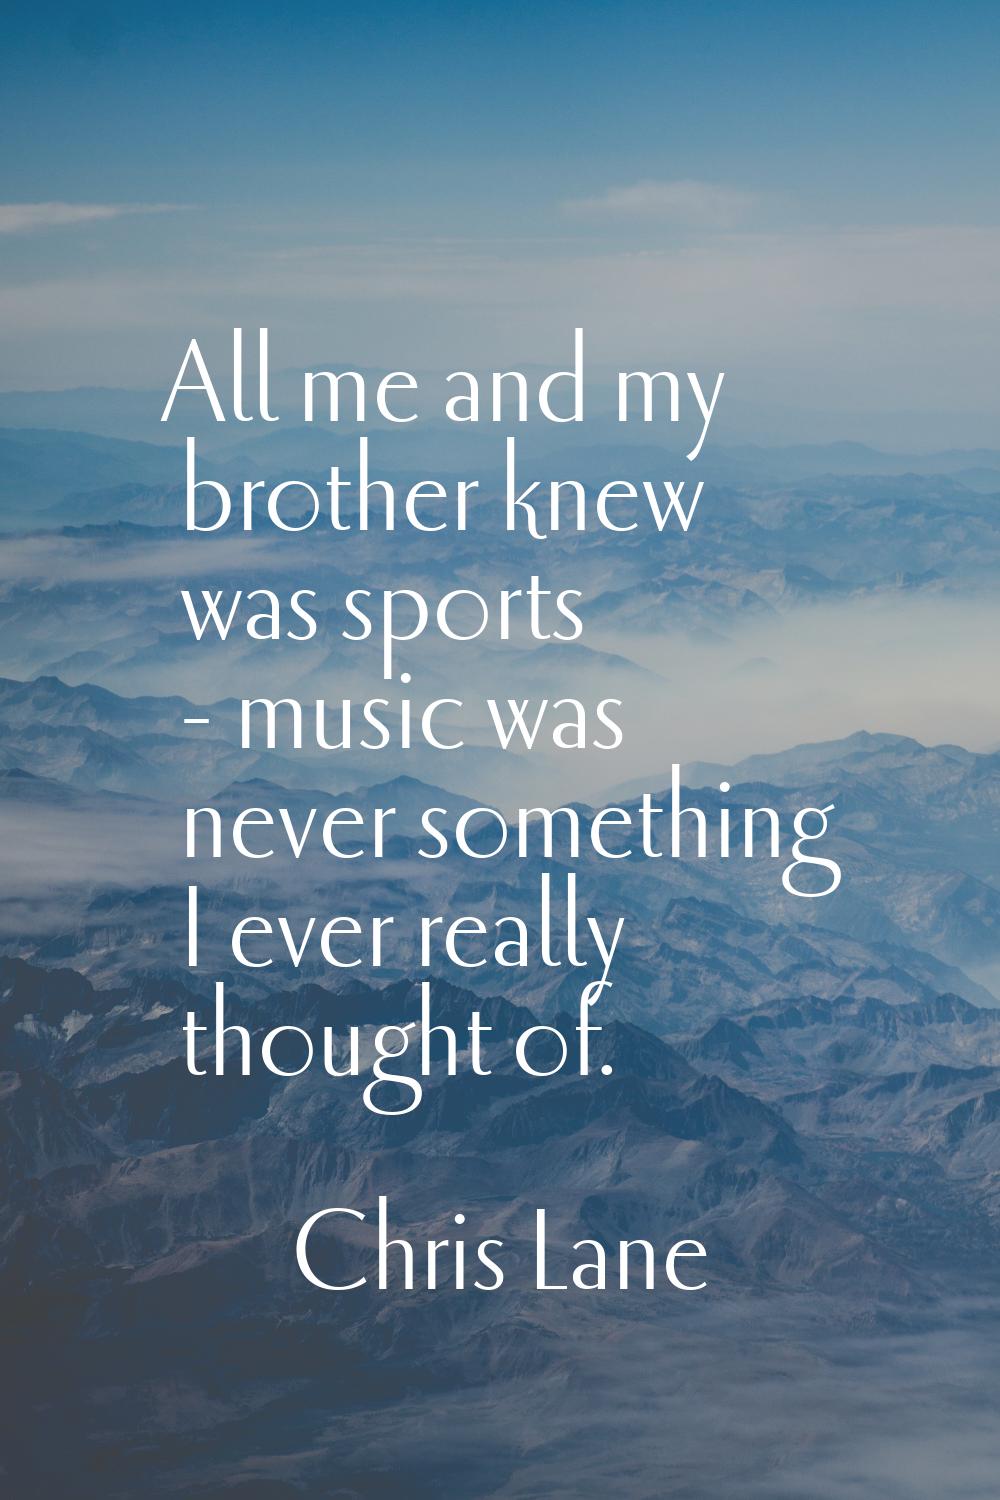 All me and my brother knew was sports - music was never something I ever really thought of.